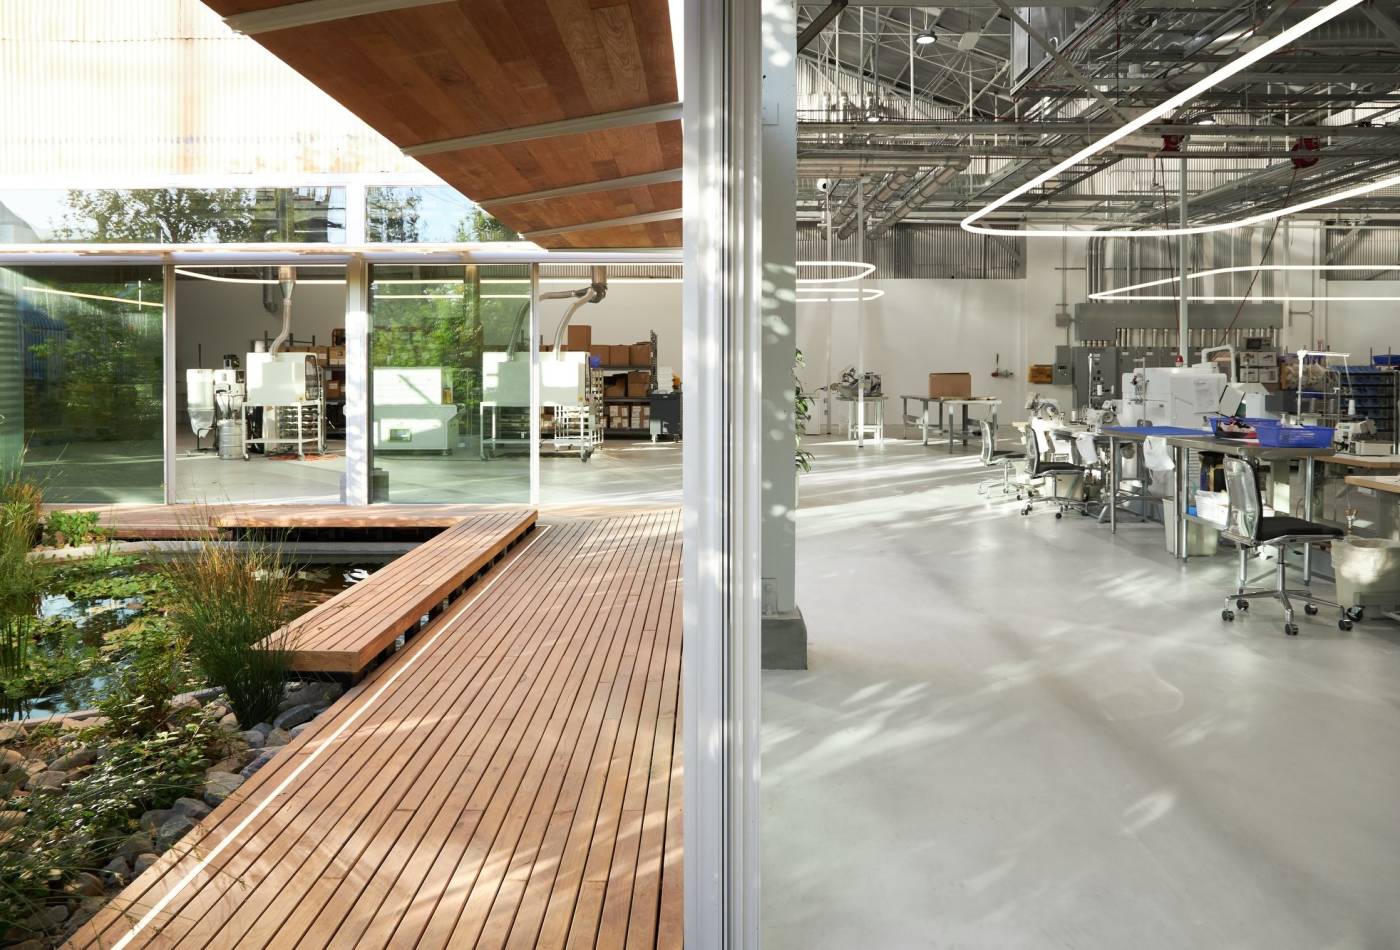 Set within an industrial Los Angeles neighborhood, KX Lab shrouds its unconventional tech-filled design within a typical warehouse exterior and sets out to change the way manufacturing is carried out in Los Angeles. The design focus supports a social mission where technology and people interconnect. 
<br><br>
The facility seamlessly merges a knit manufacturing space with workspace, research and development, retail environment, and exhibition space. KX Lab sees its new home as a prototype for “radically more humane” manufacturing environments focused on sustainability and transparency. As a local manufacturer, KX Lab aims to bring consumers, products, and the people that make them closer together.